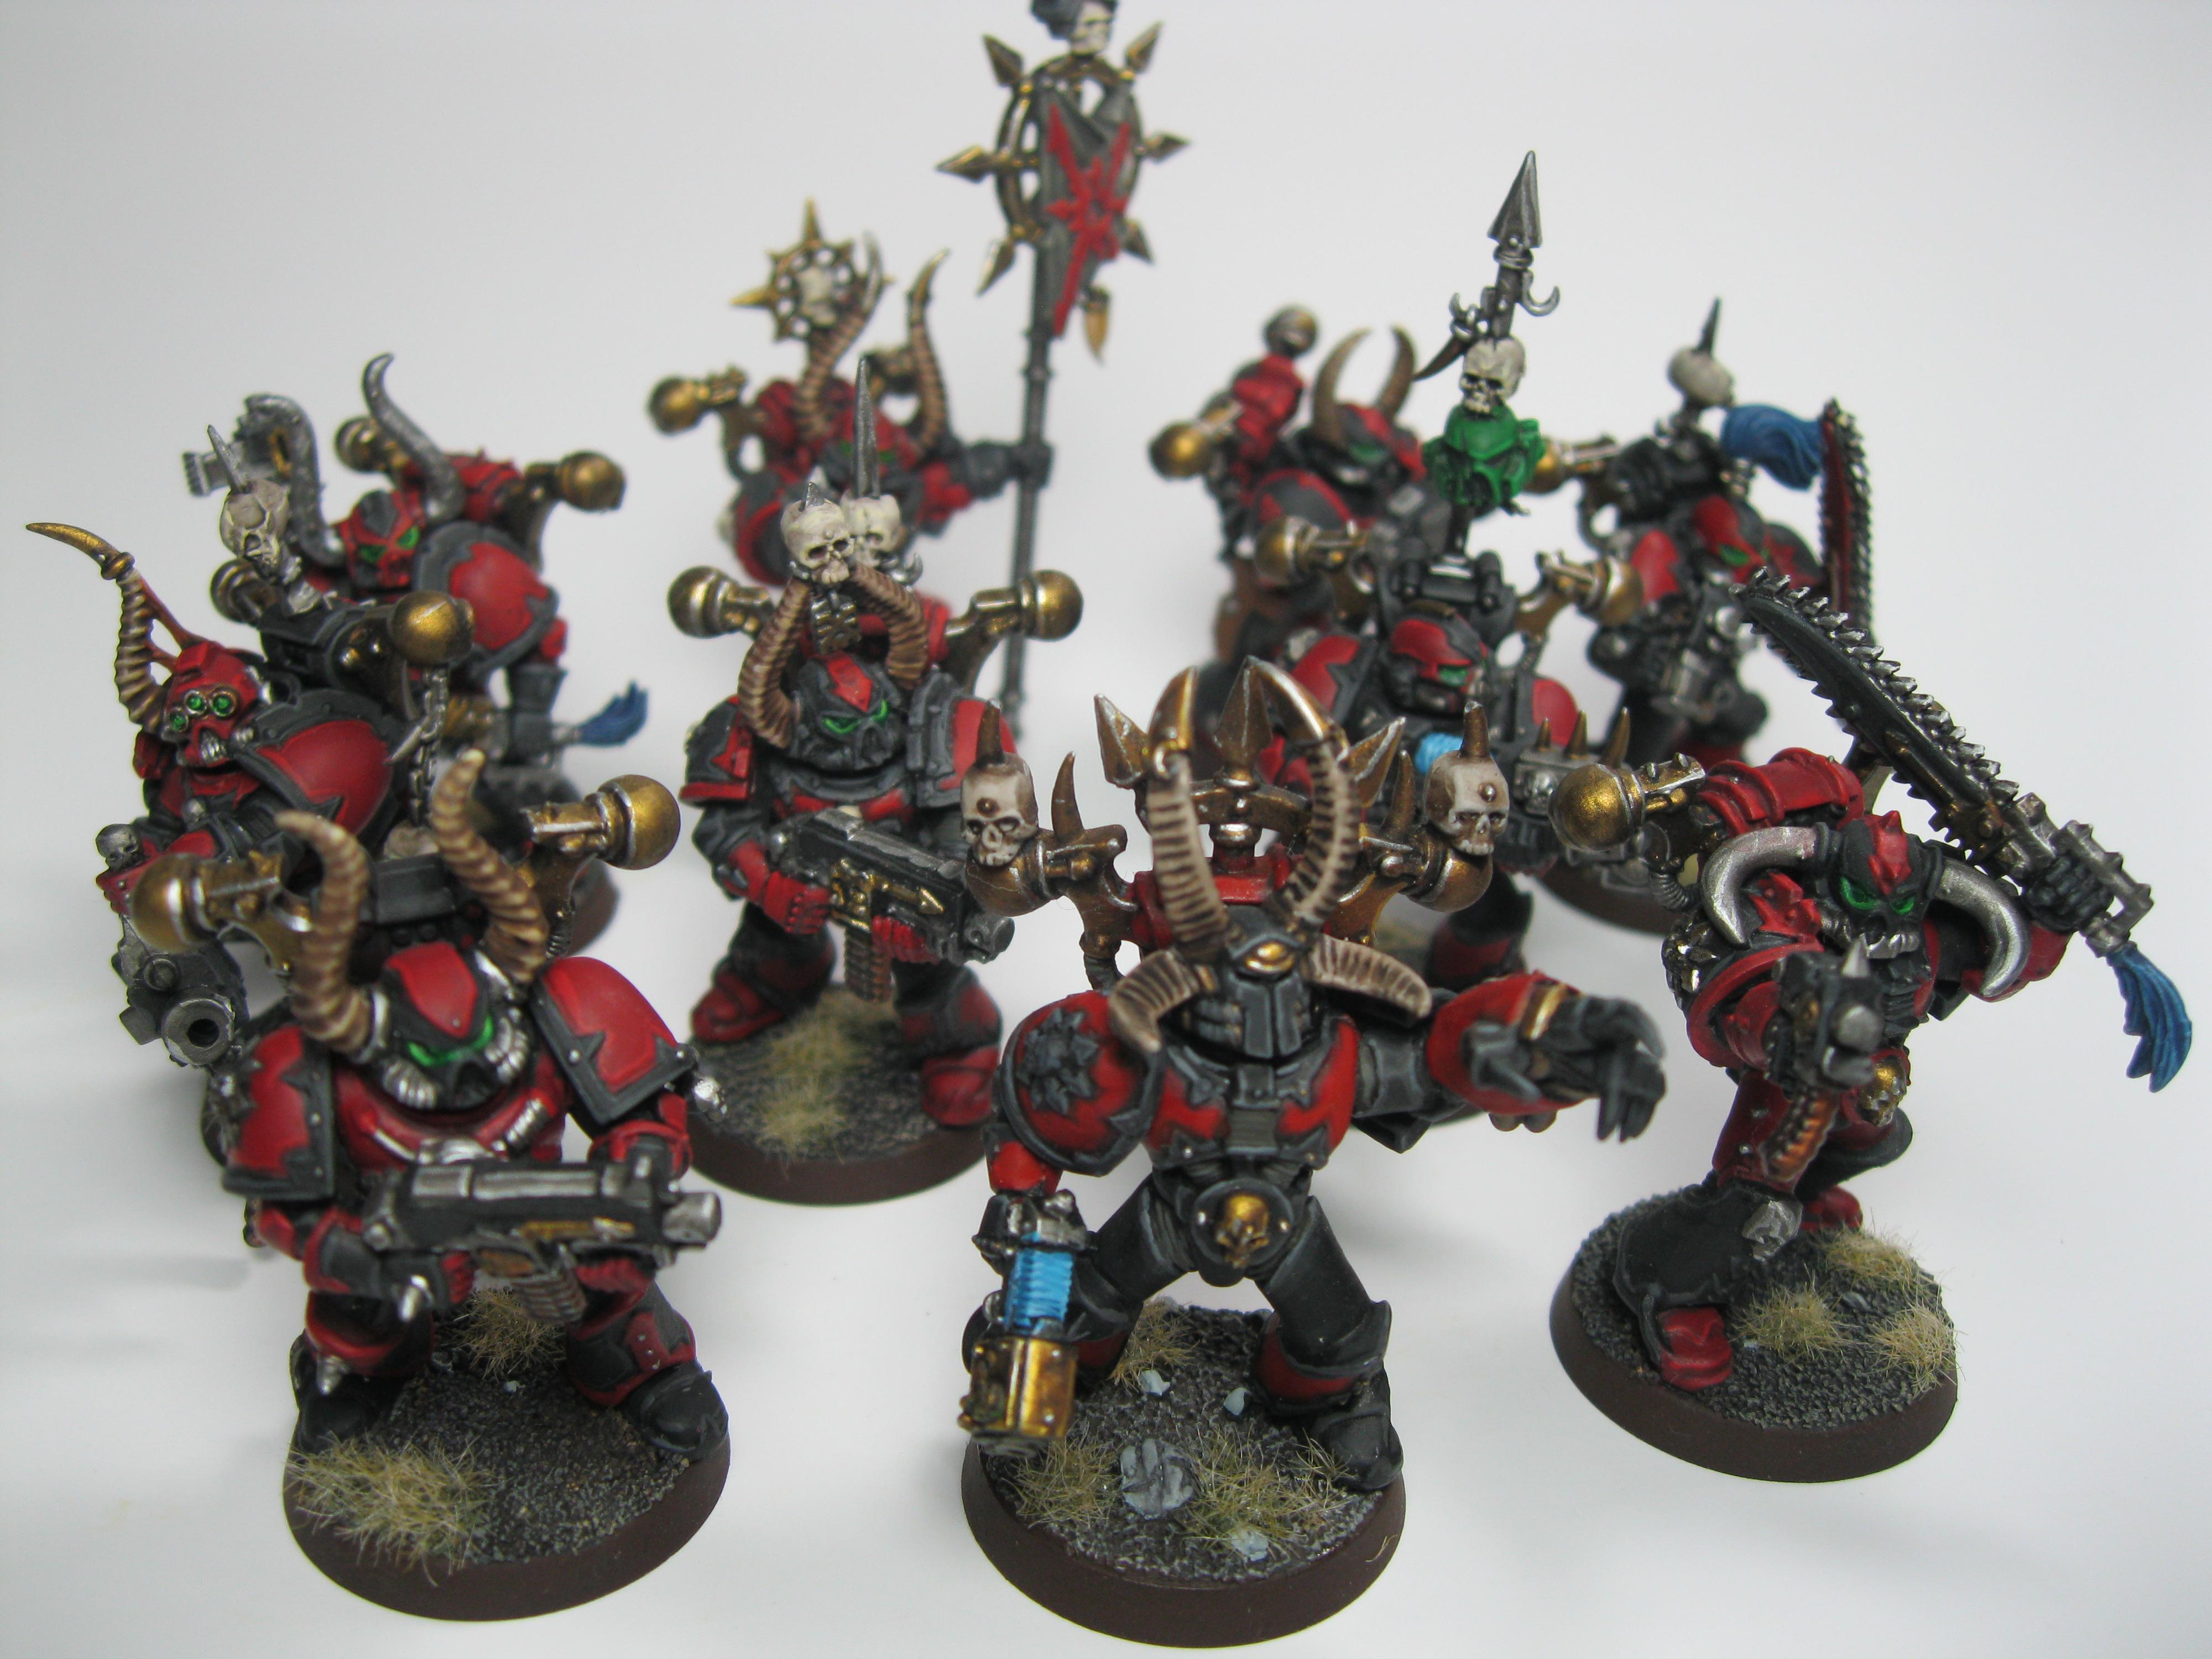 Chaos, Chaos Space Marines, Hamadrya, Red Corsairs, Warhammer 40,000 - Red Corsair Space - Gallery - DakkaDakka | Roll the dice to see if I'm getting drunk.